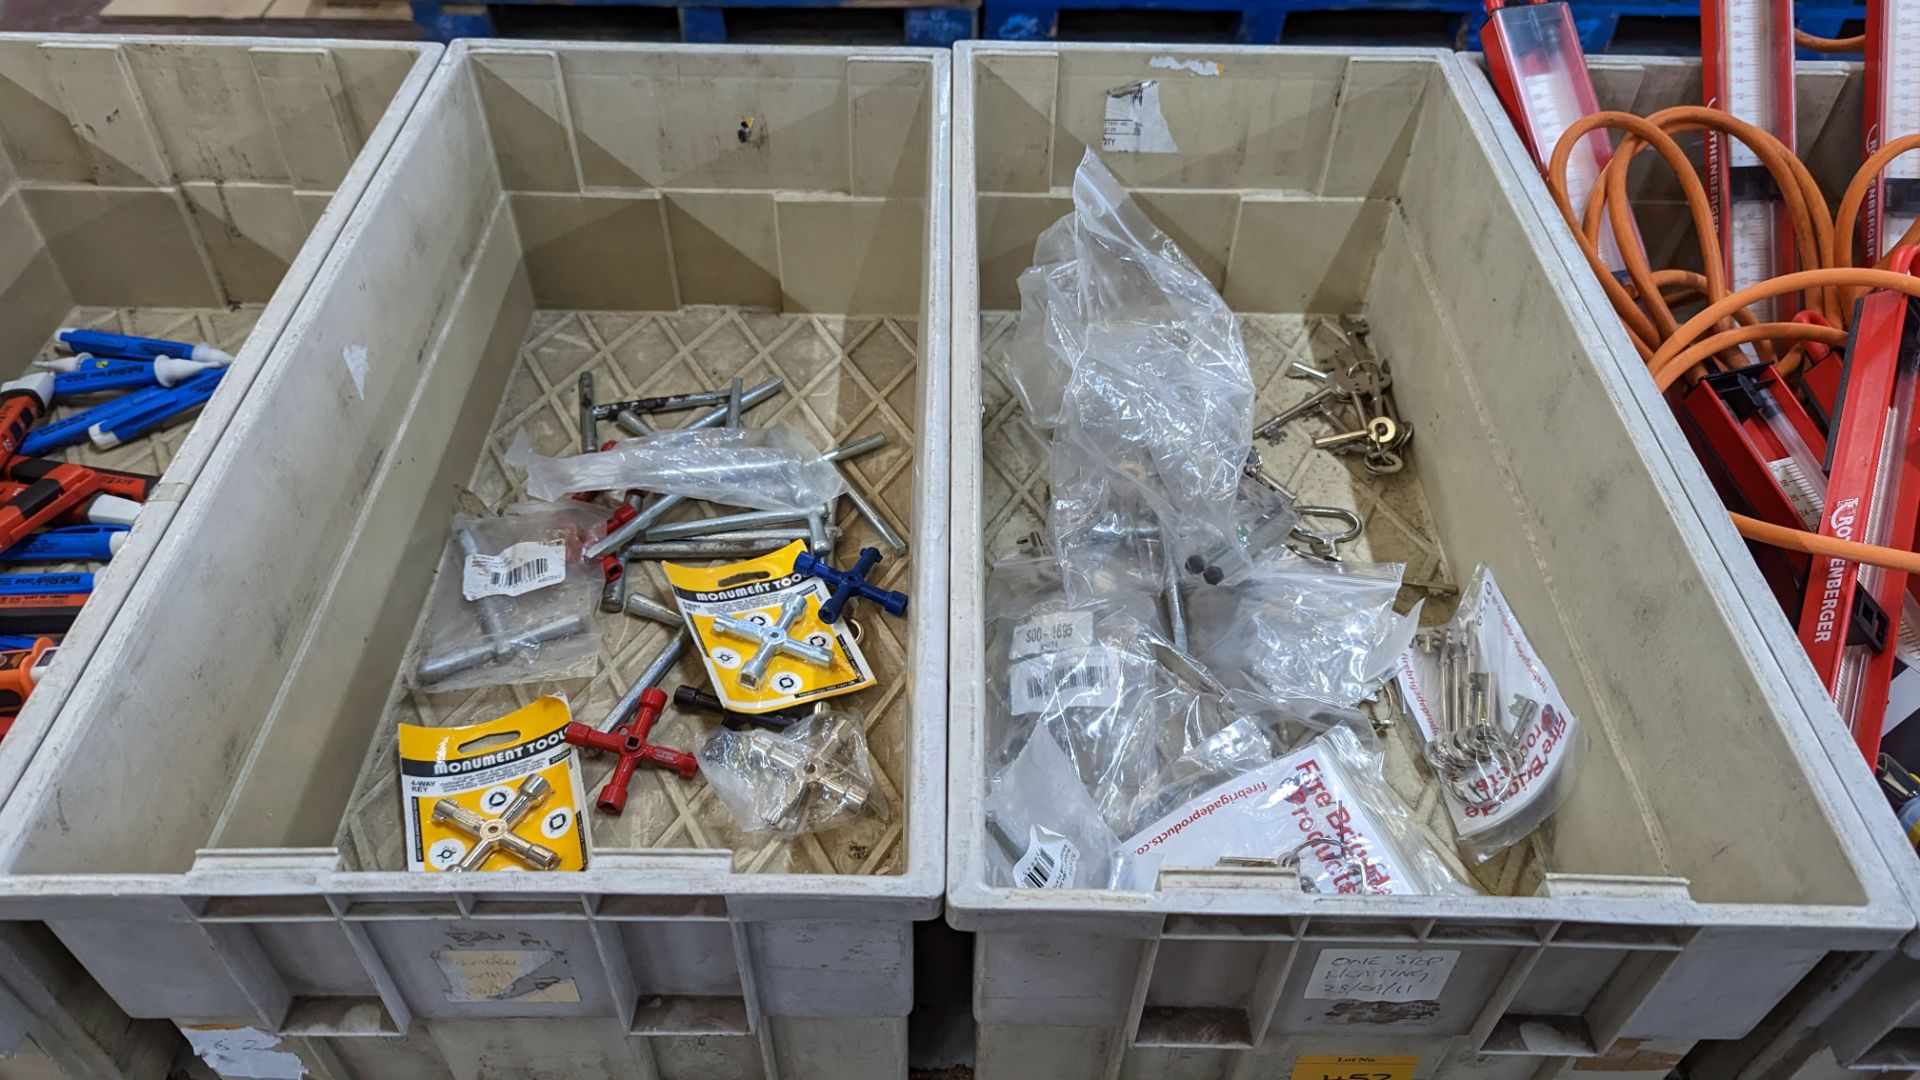 The contents of 2 crates of assorted keys, for cabinets and emergency access doors and meters and mo